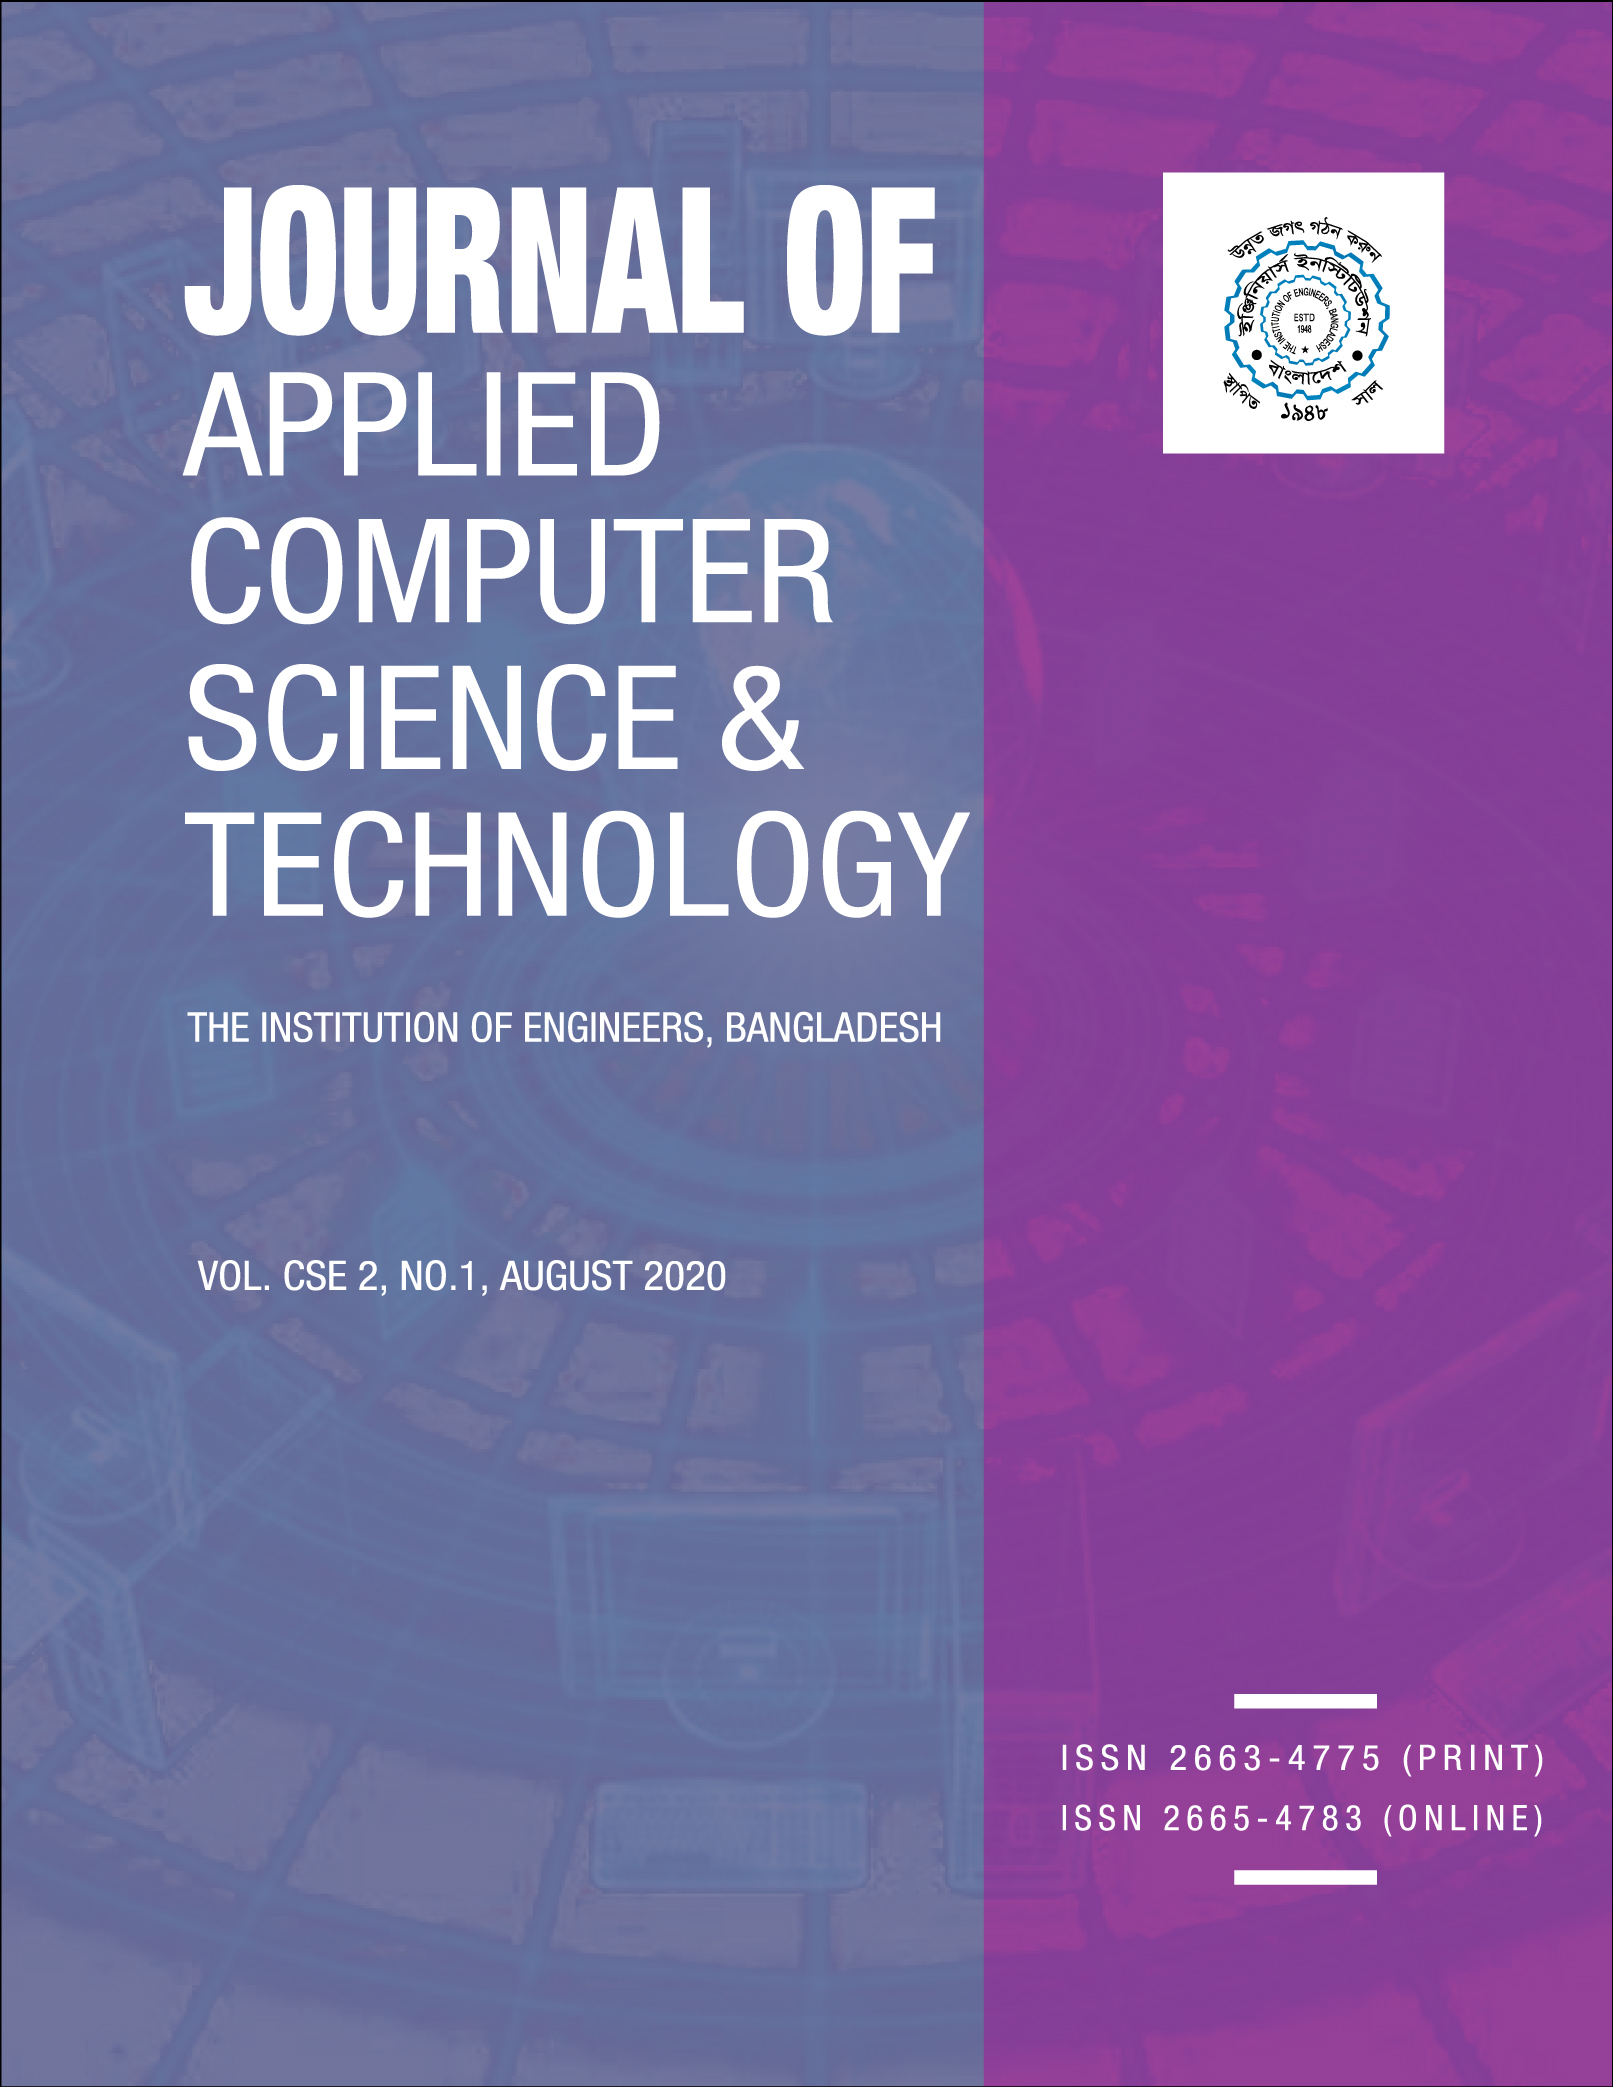 Journal of Applied Computer Science & Technology Vol:  CSE 2, No. 1, August 2020